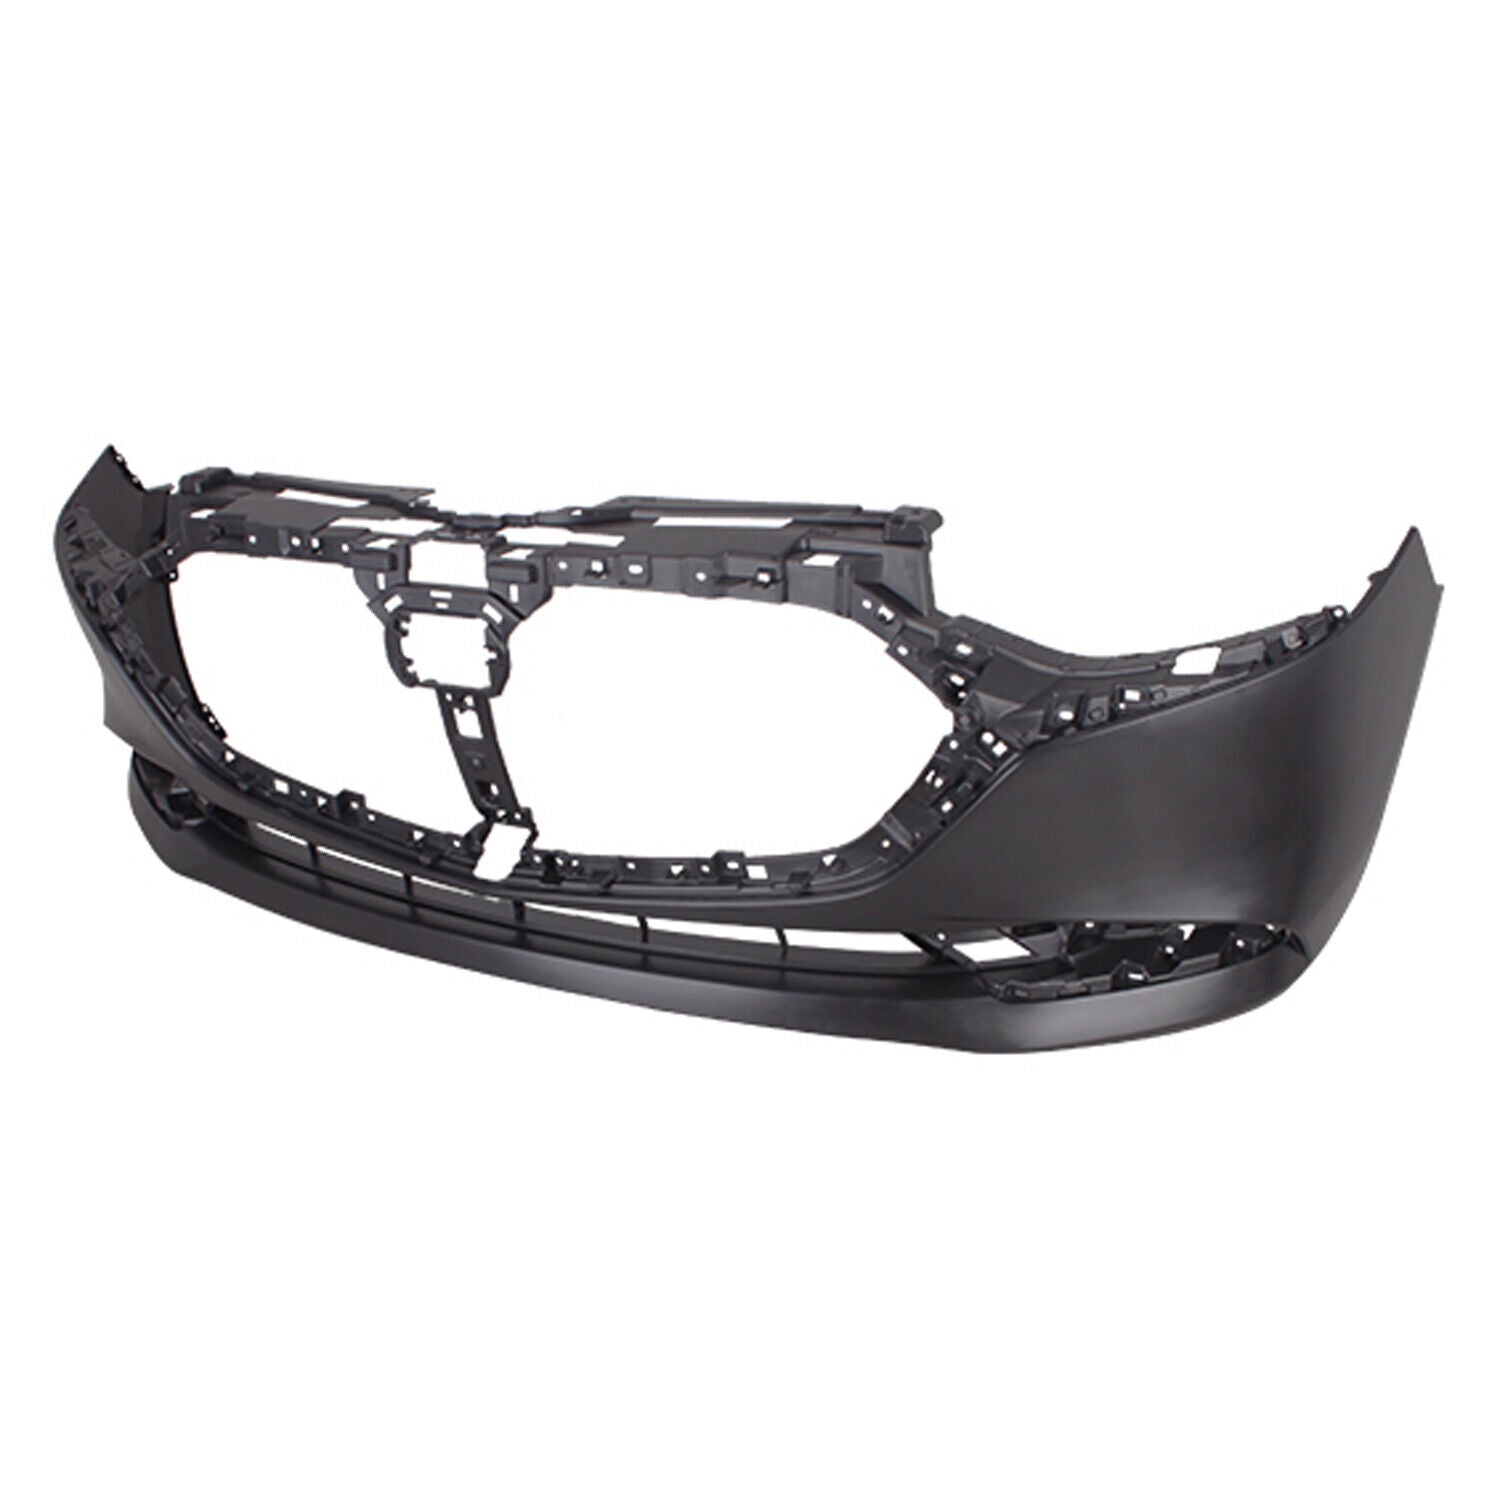 2019-2022 MAZDA 3; Front Bumper Cover; Japan/Mexico Built Painted to Match